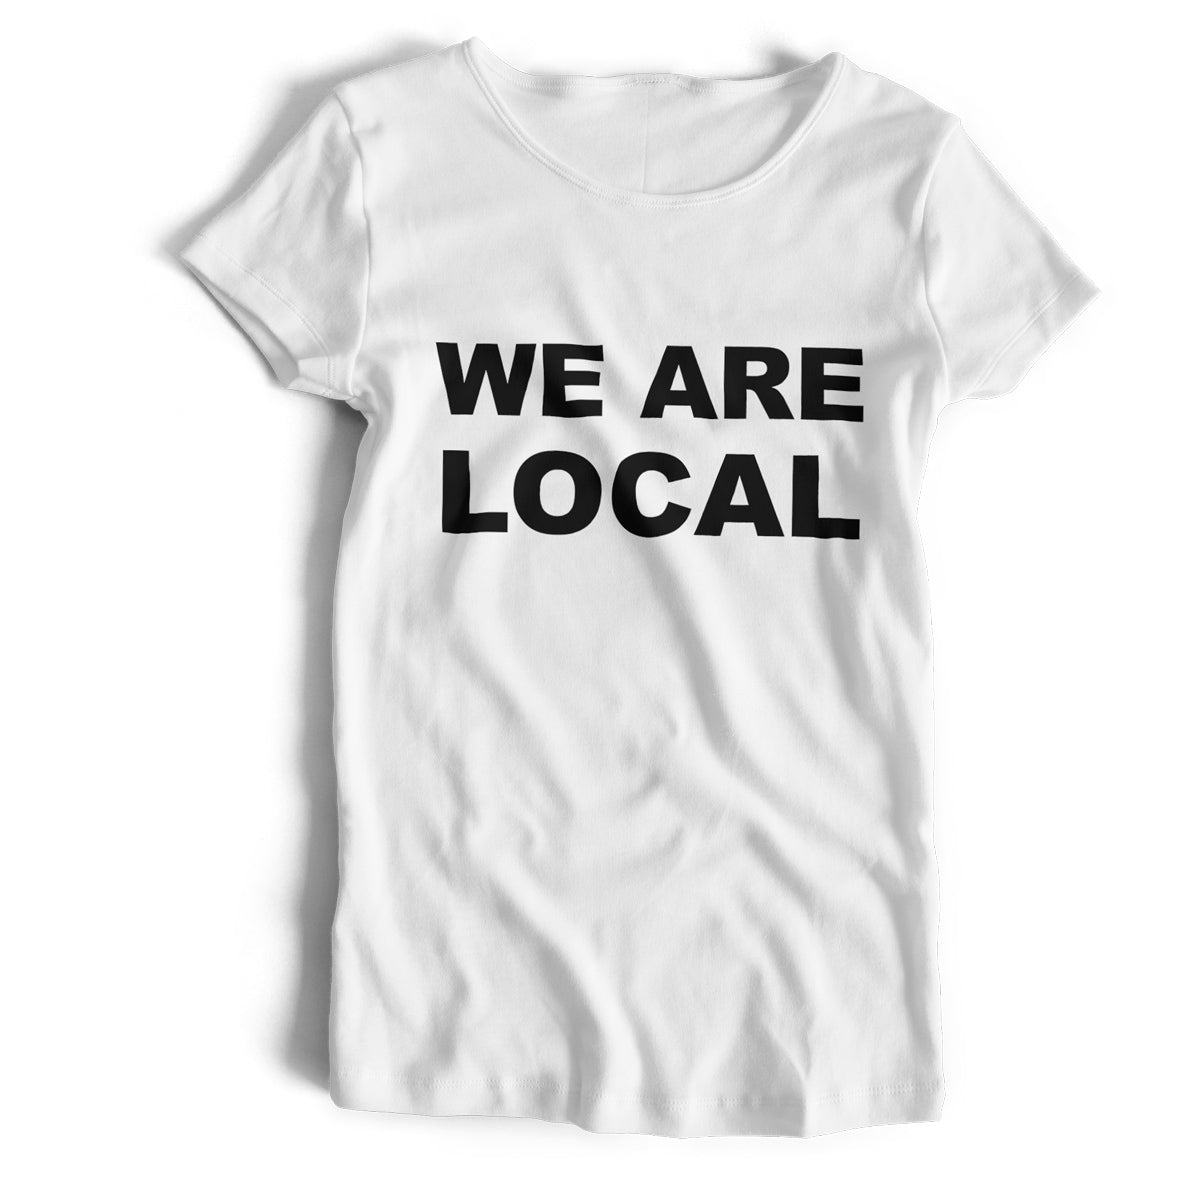 Inspired by the League Of Gentlemen - We Are Local T shirt An Old Skool Hooligans Comedy Original